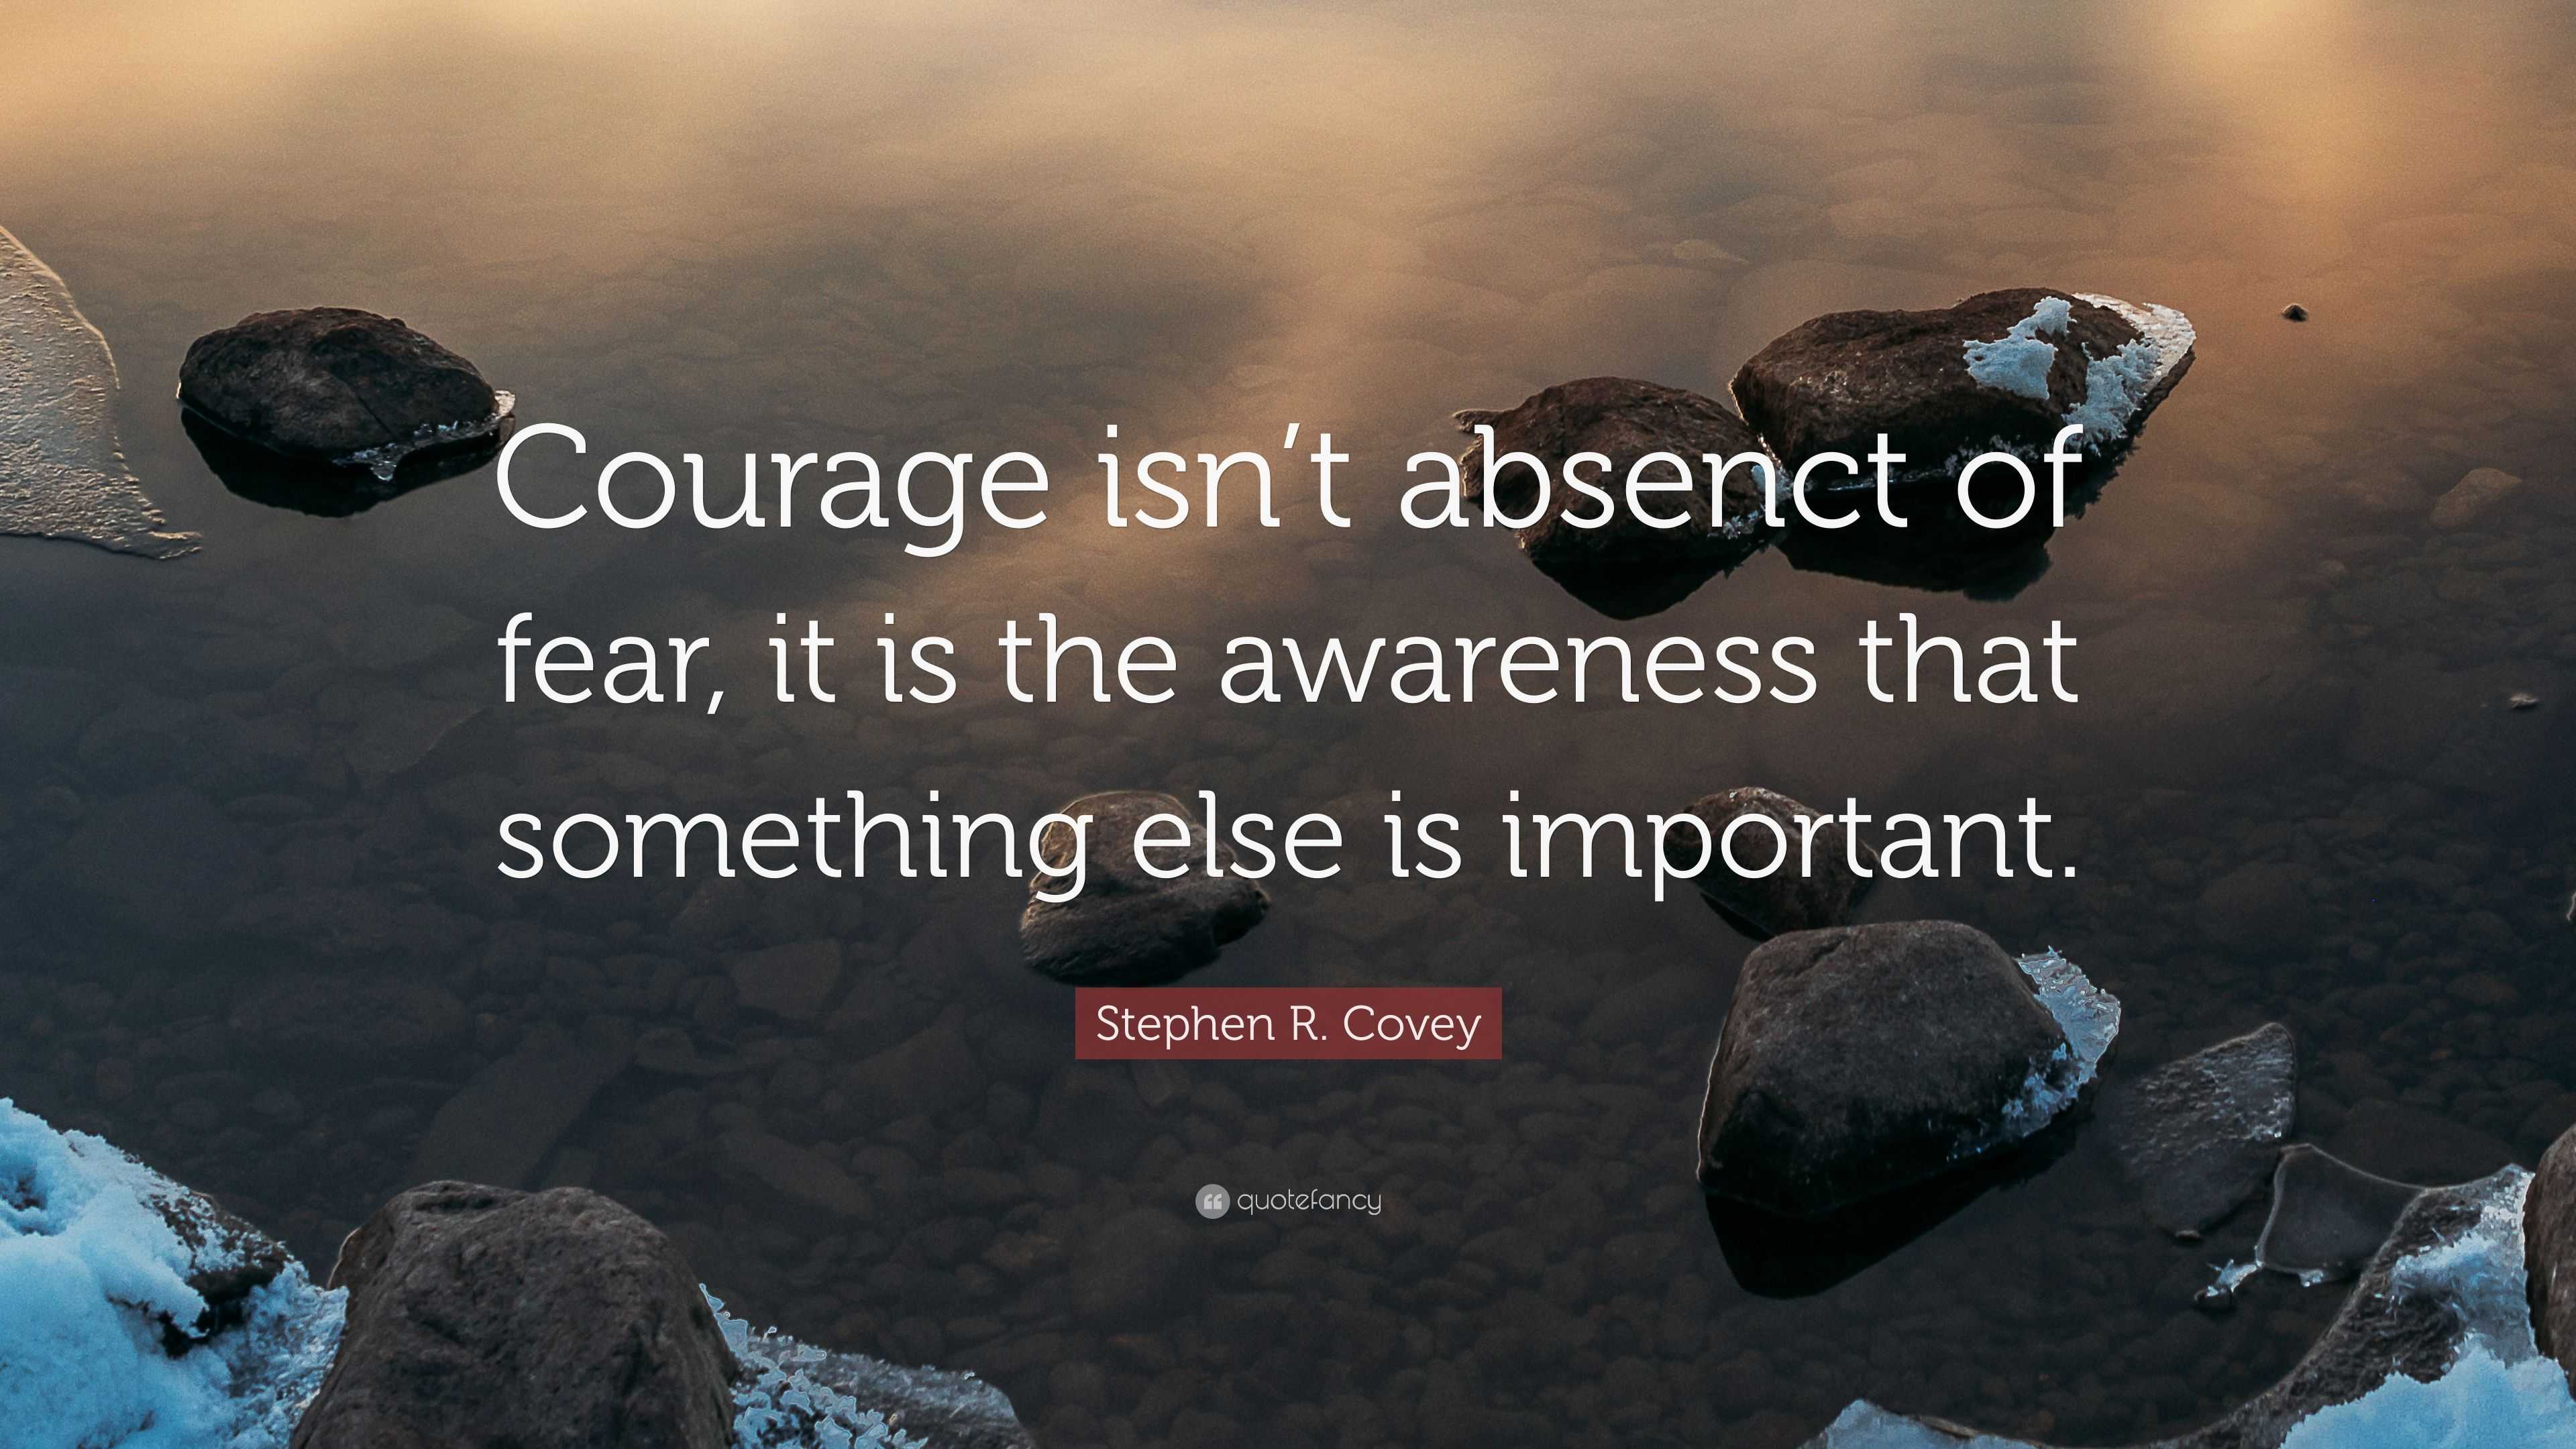 Stephen R. Covey Quote: “Courage isn’t absenct of fear, it is the ...